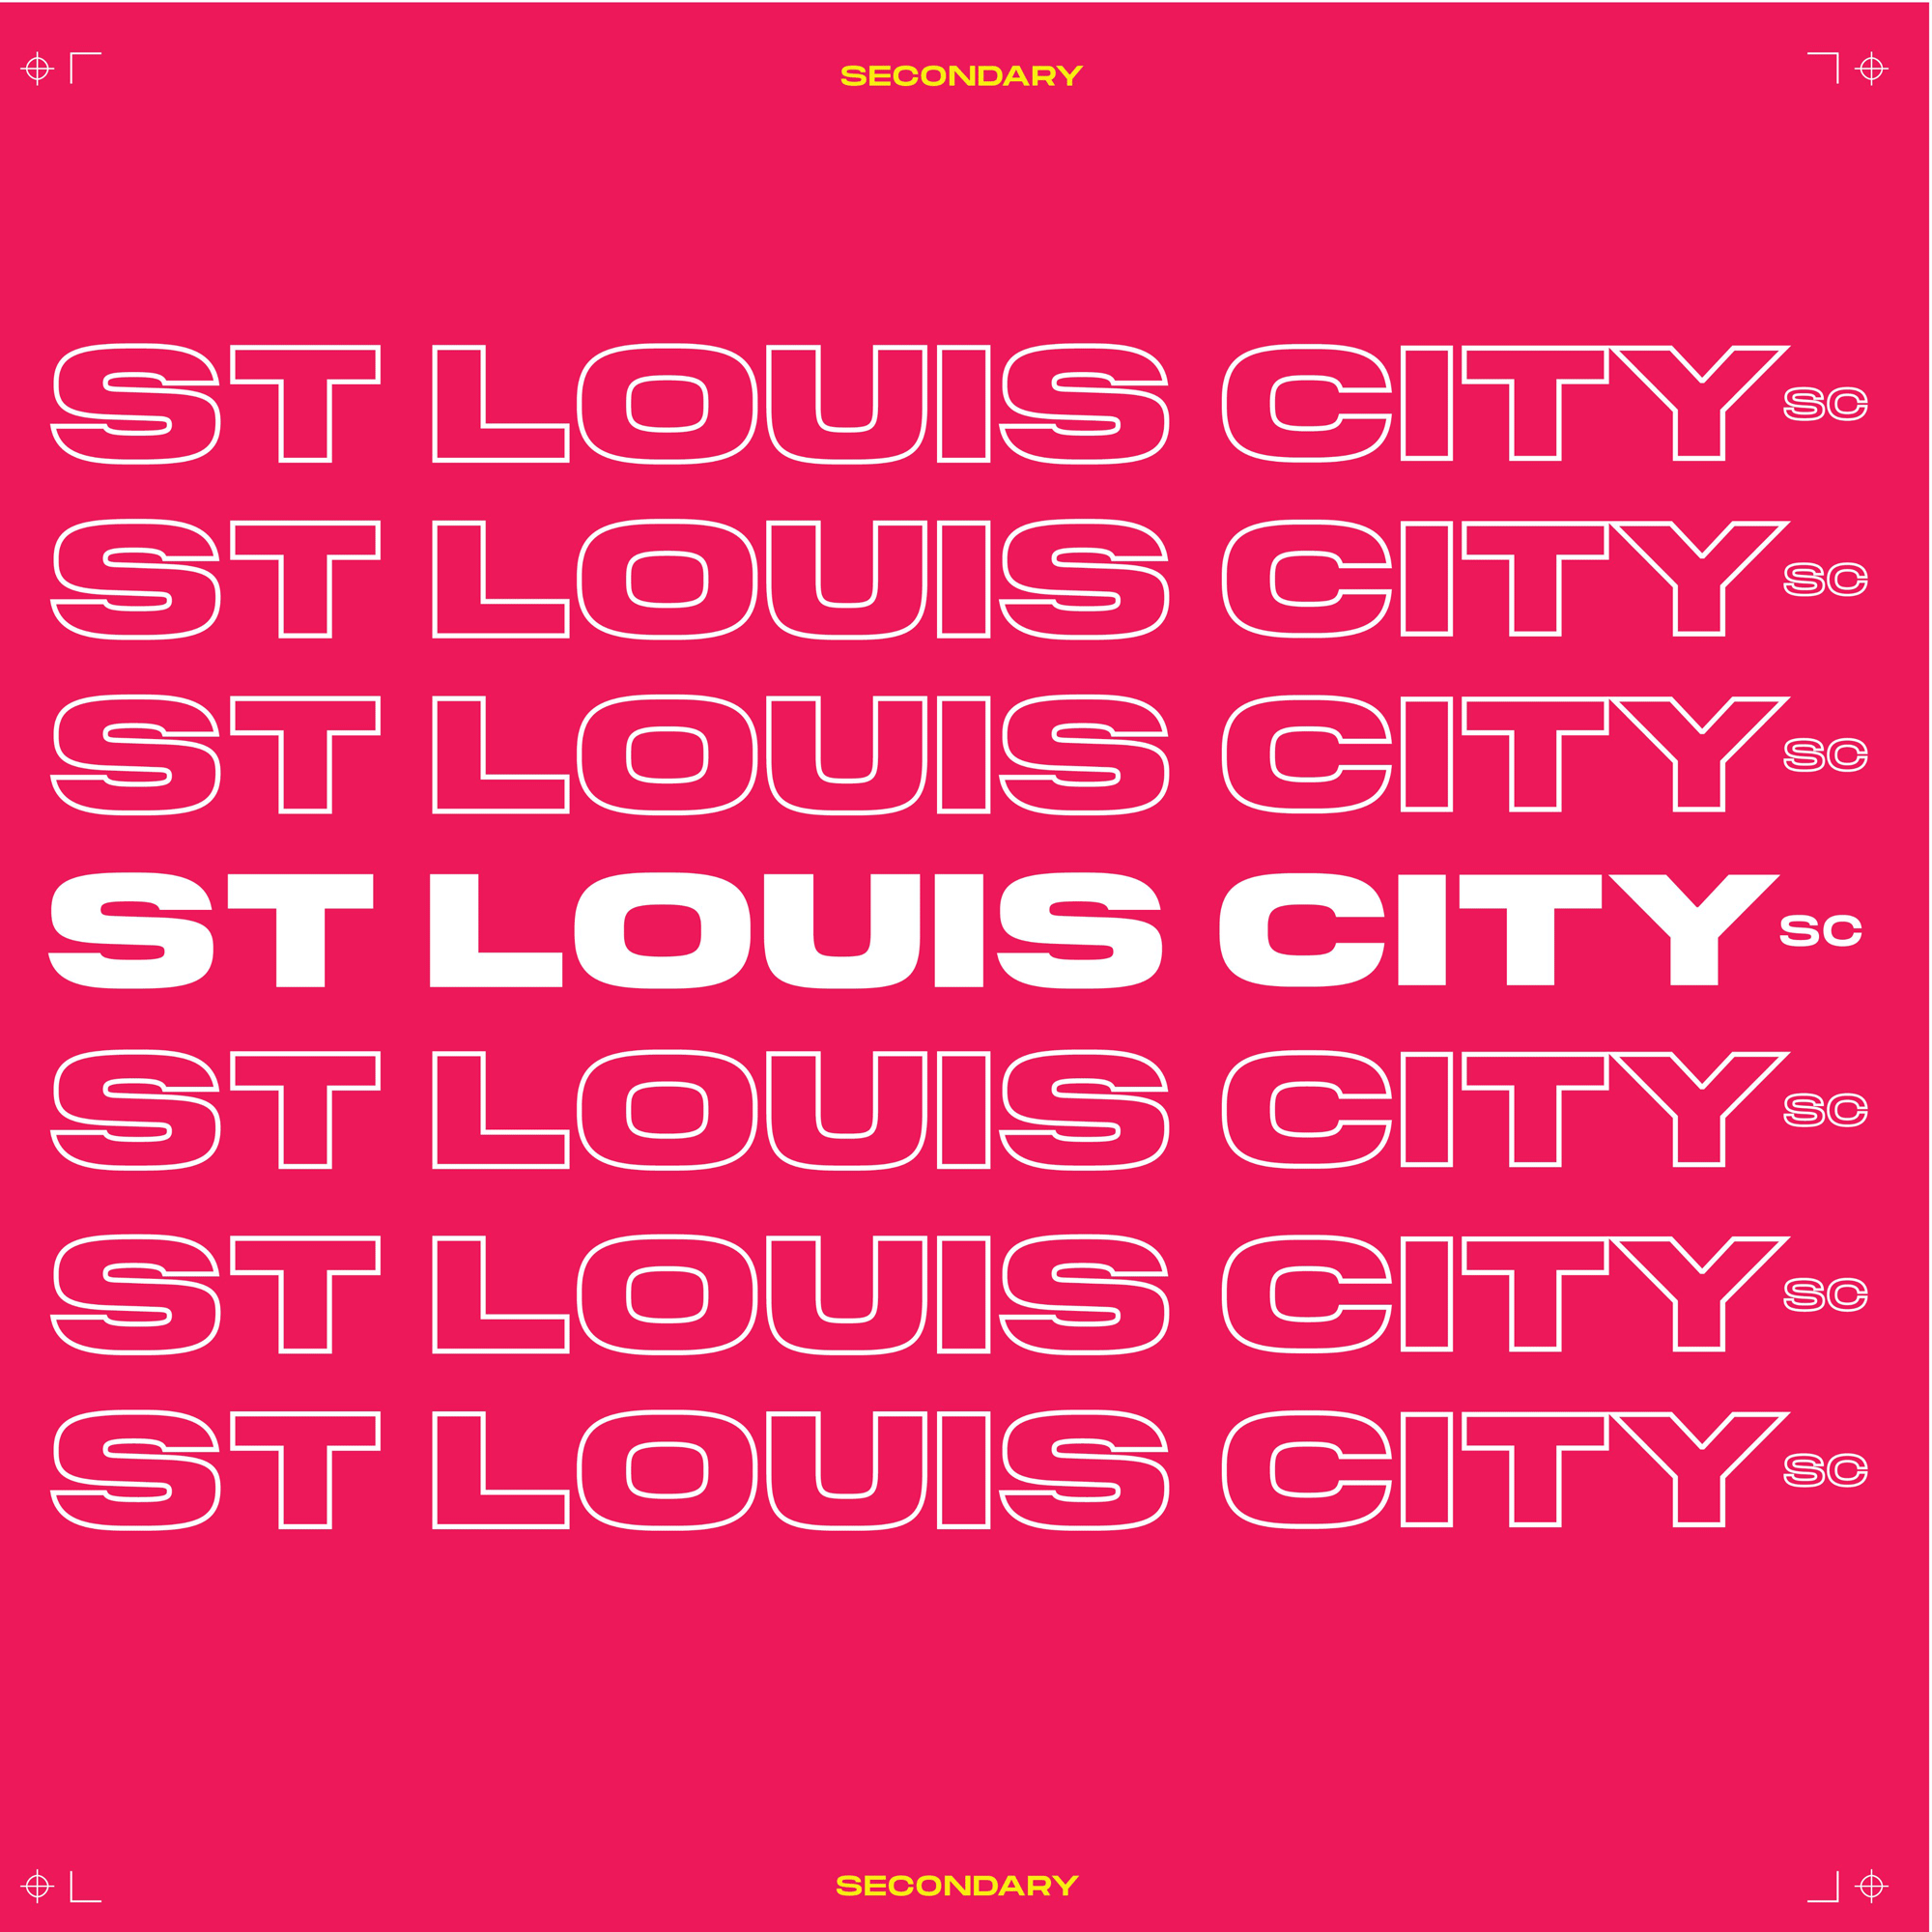 New Name and Logo for St. Louis City SC